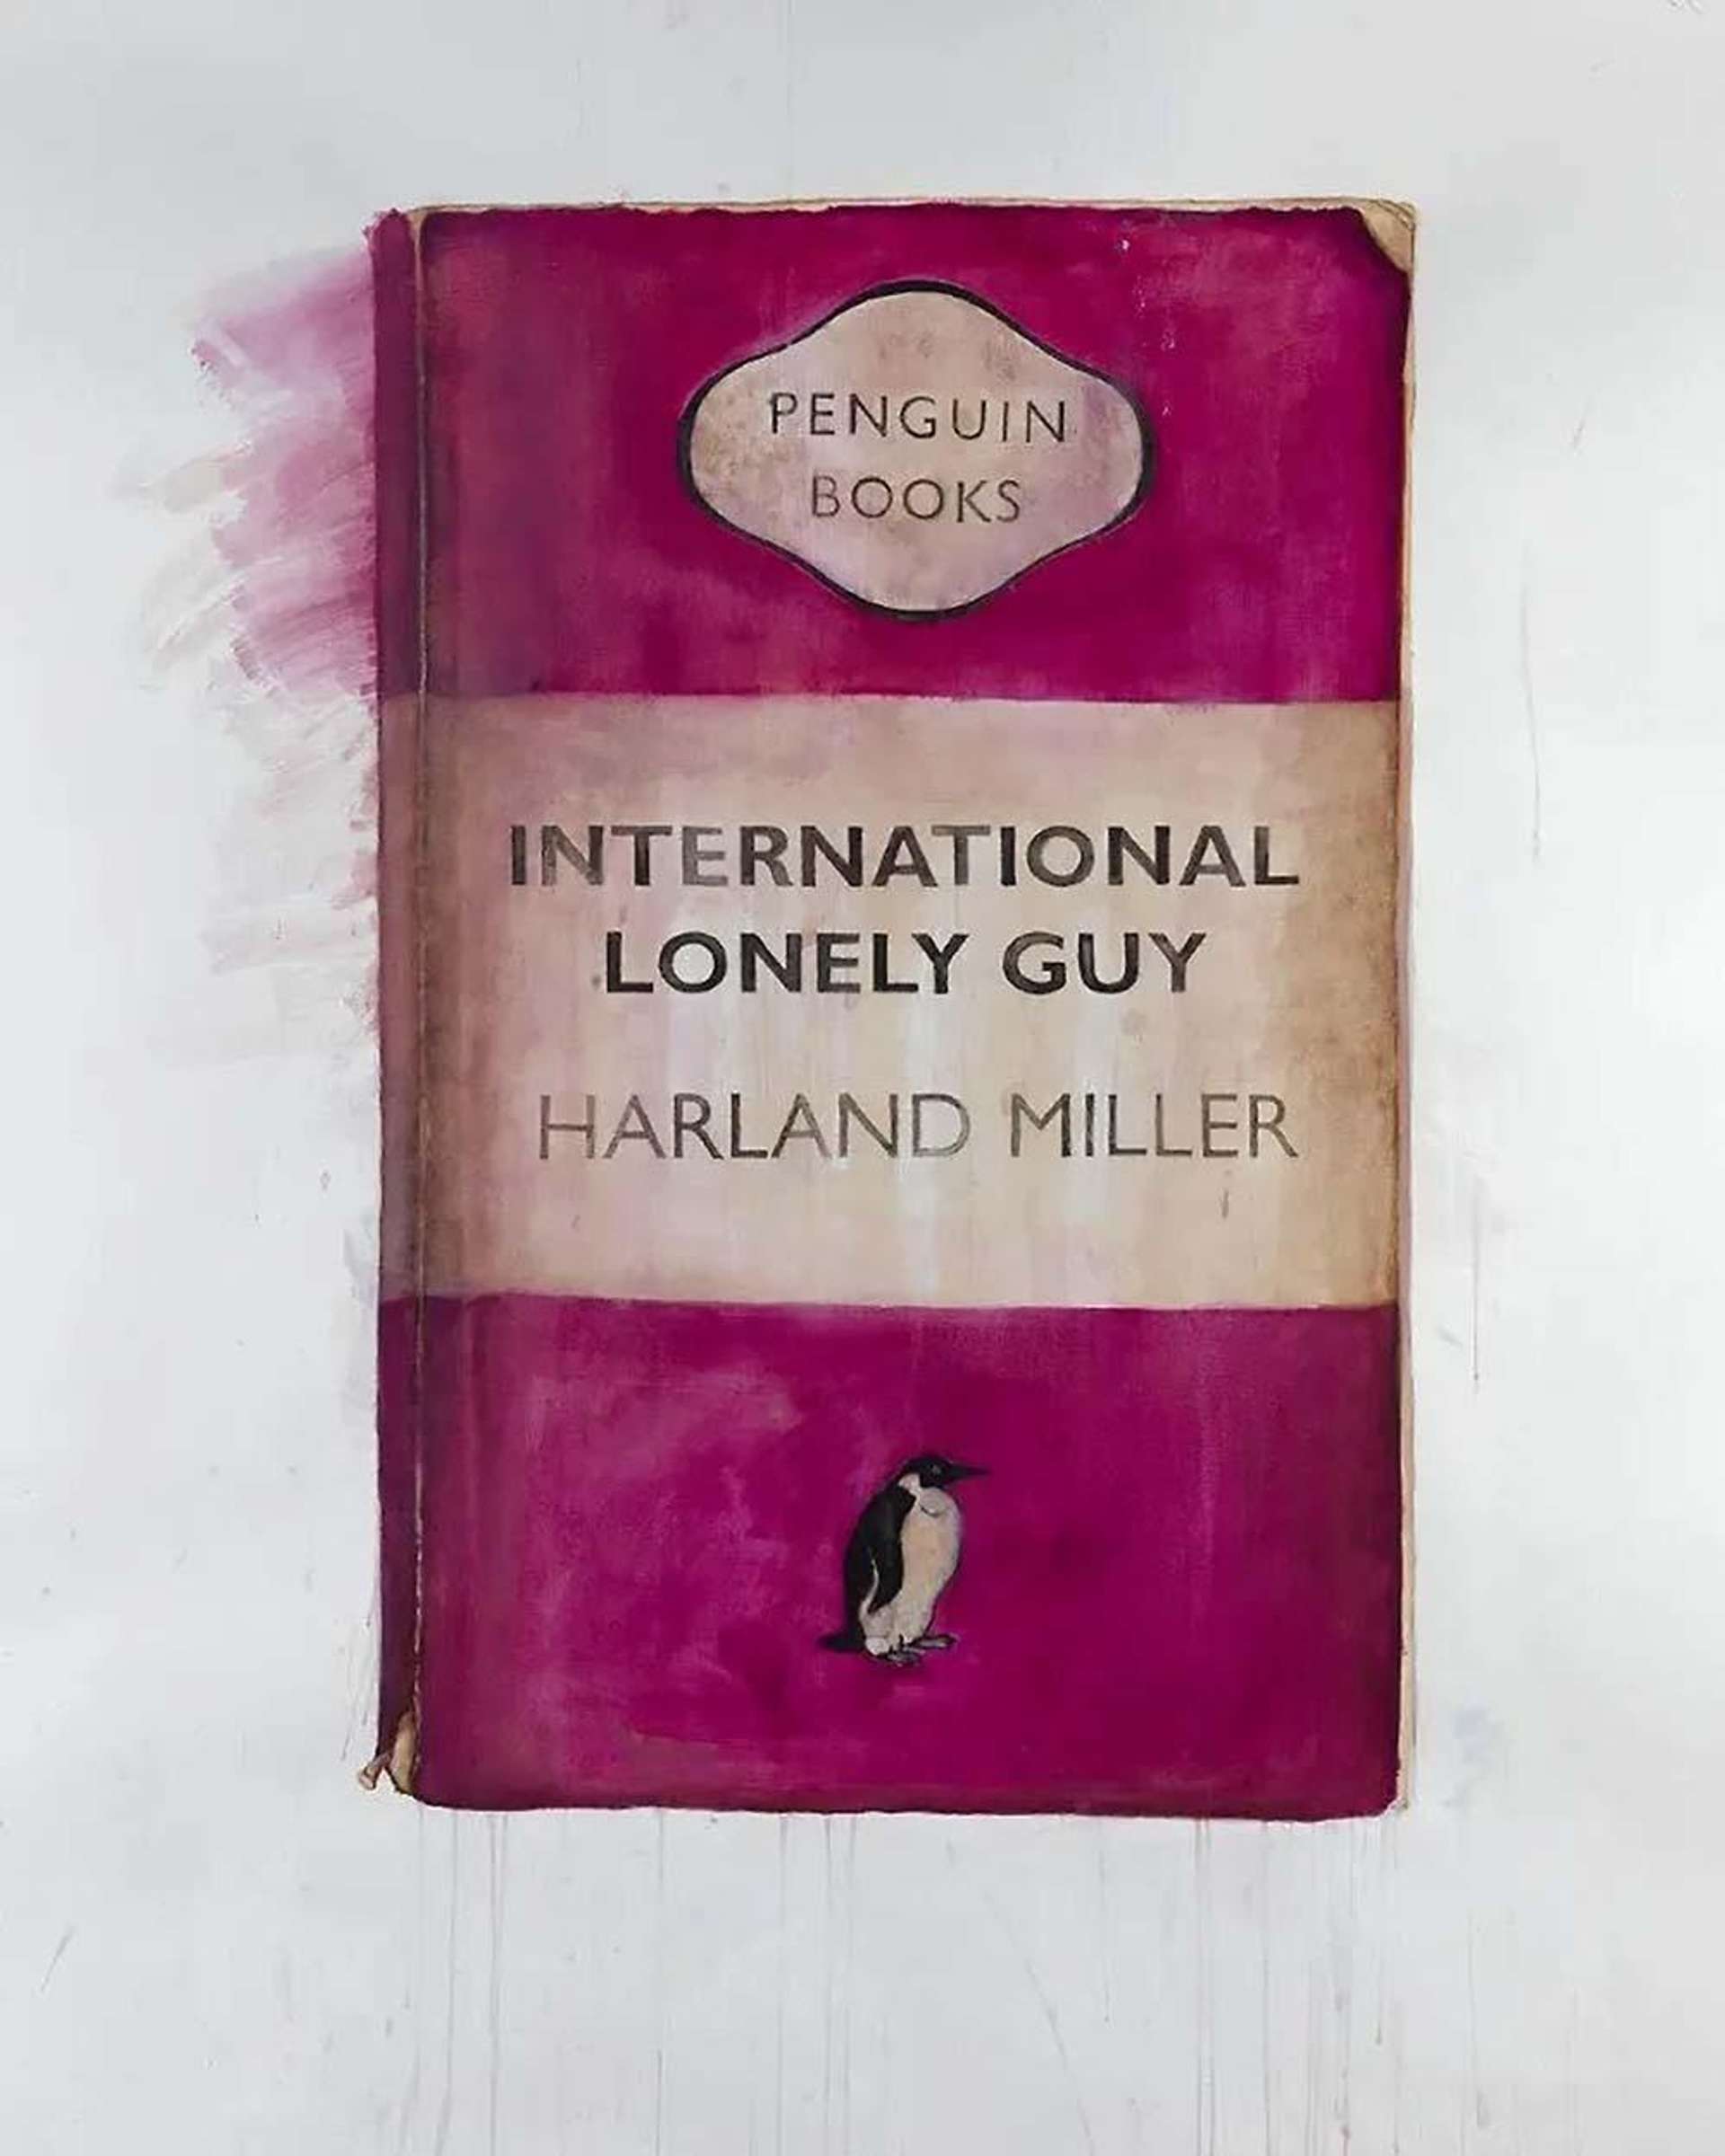 International Lonely Guy by Harland Miller